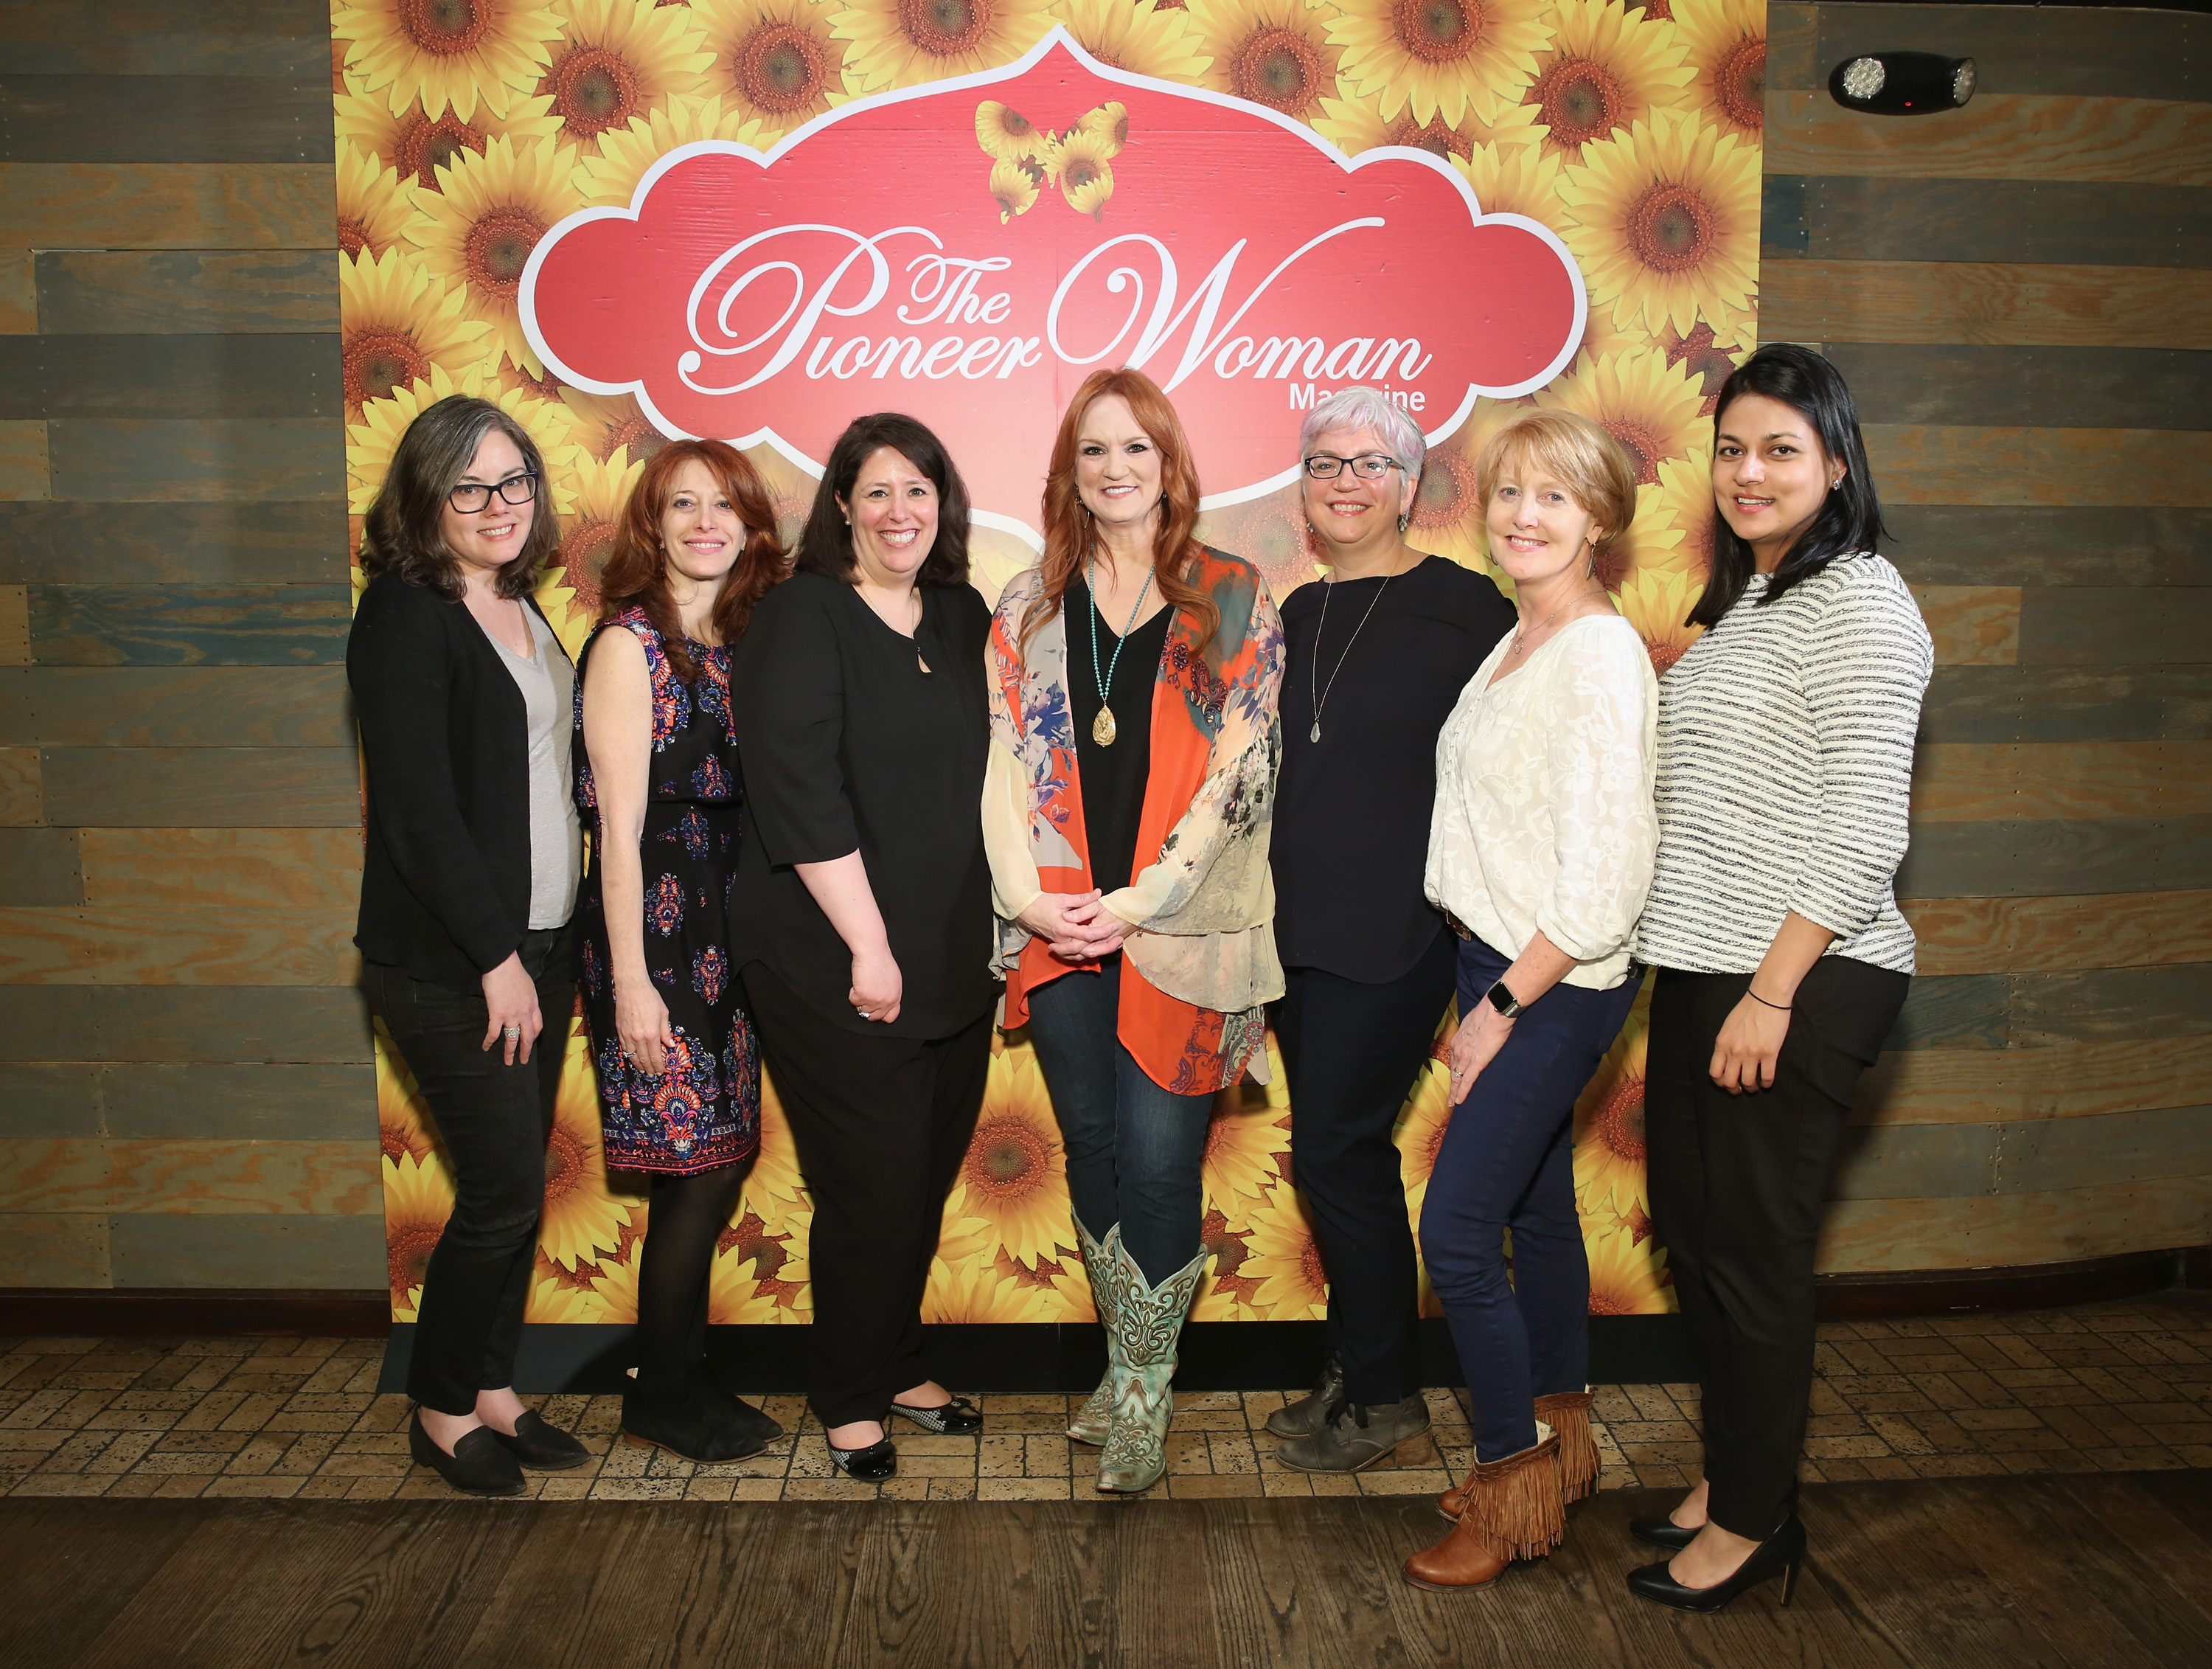 Ree Drummond at a Pioneer Woman event  